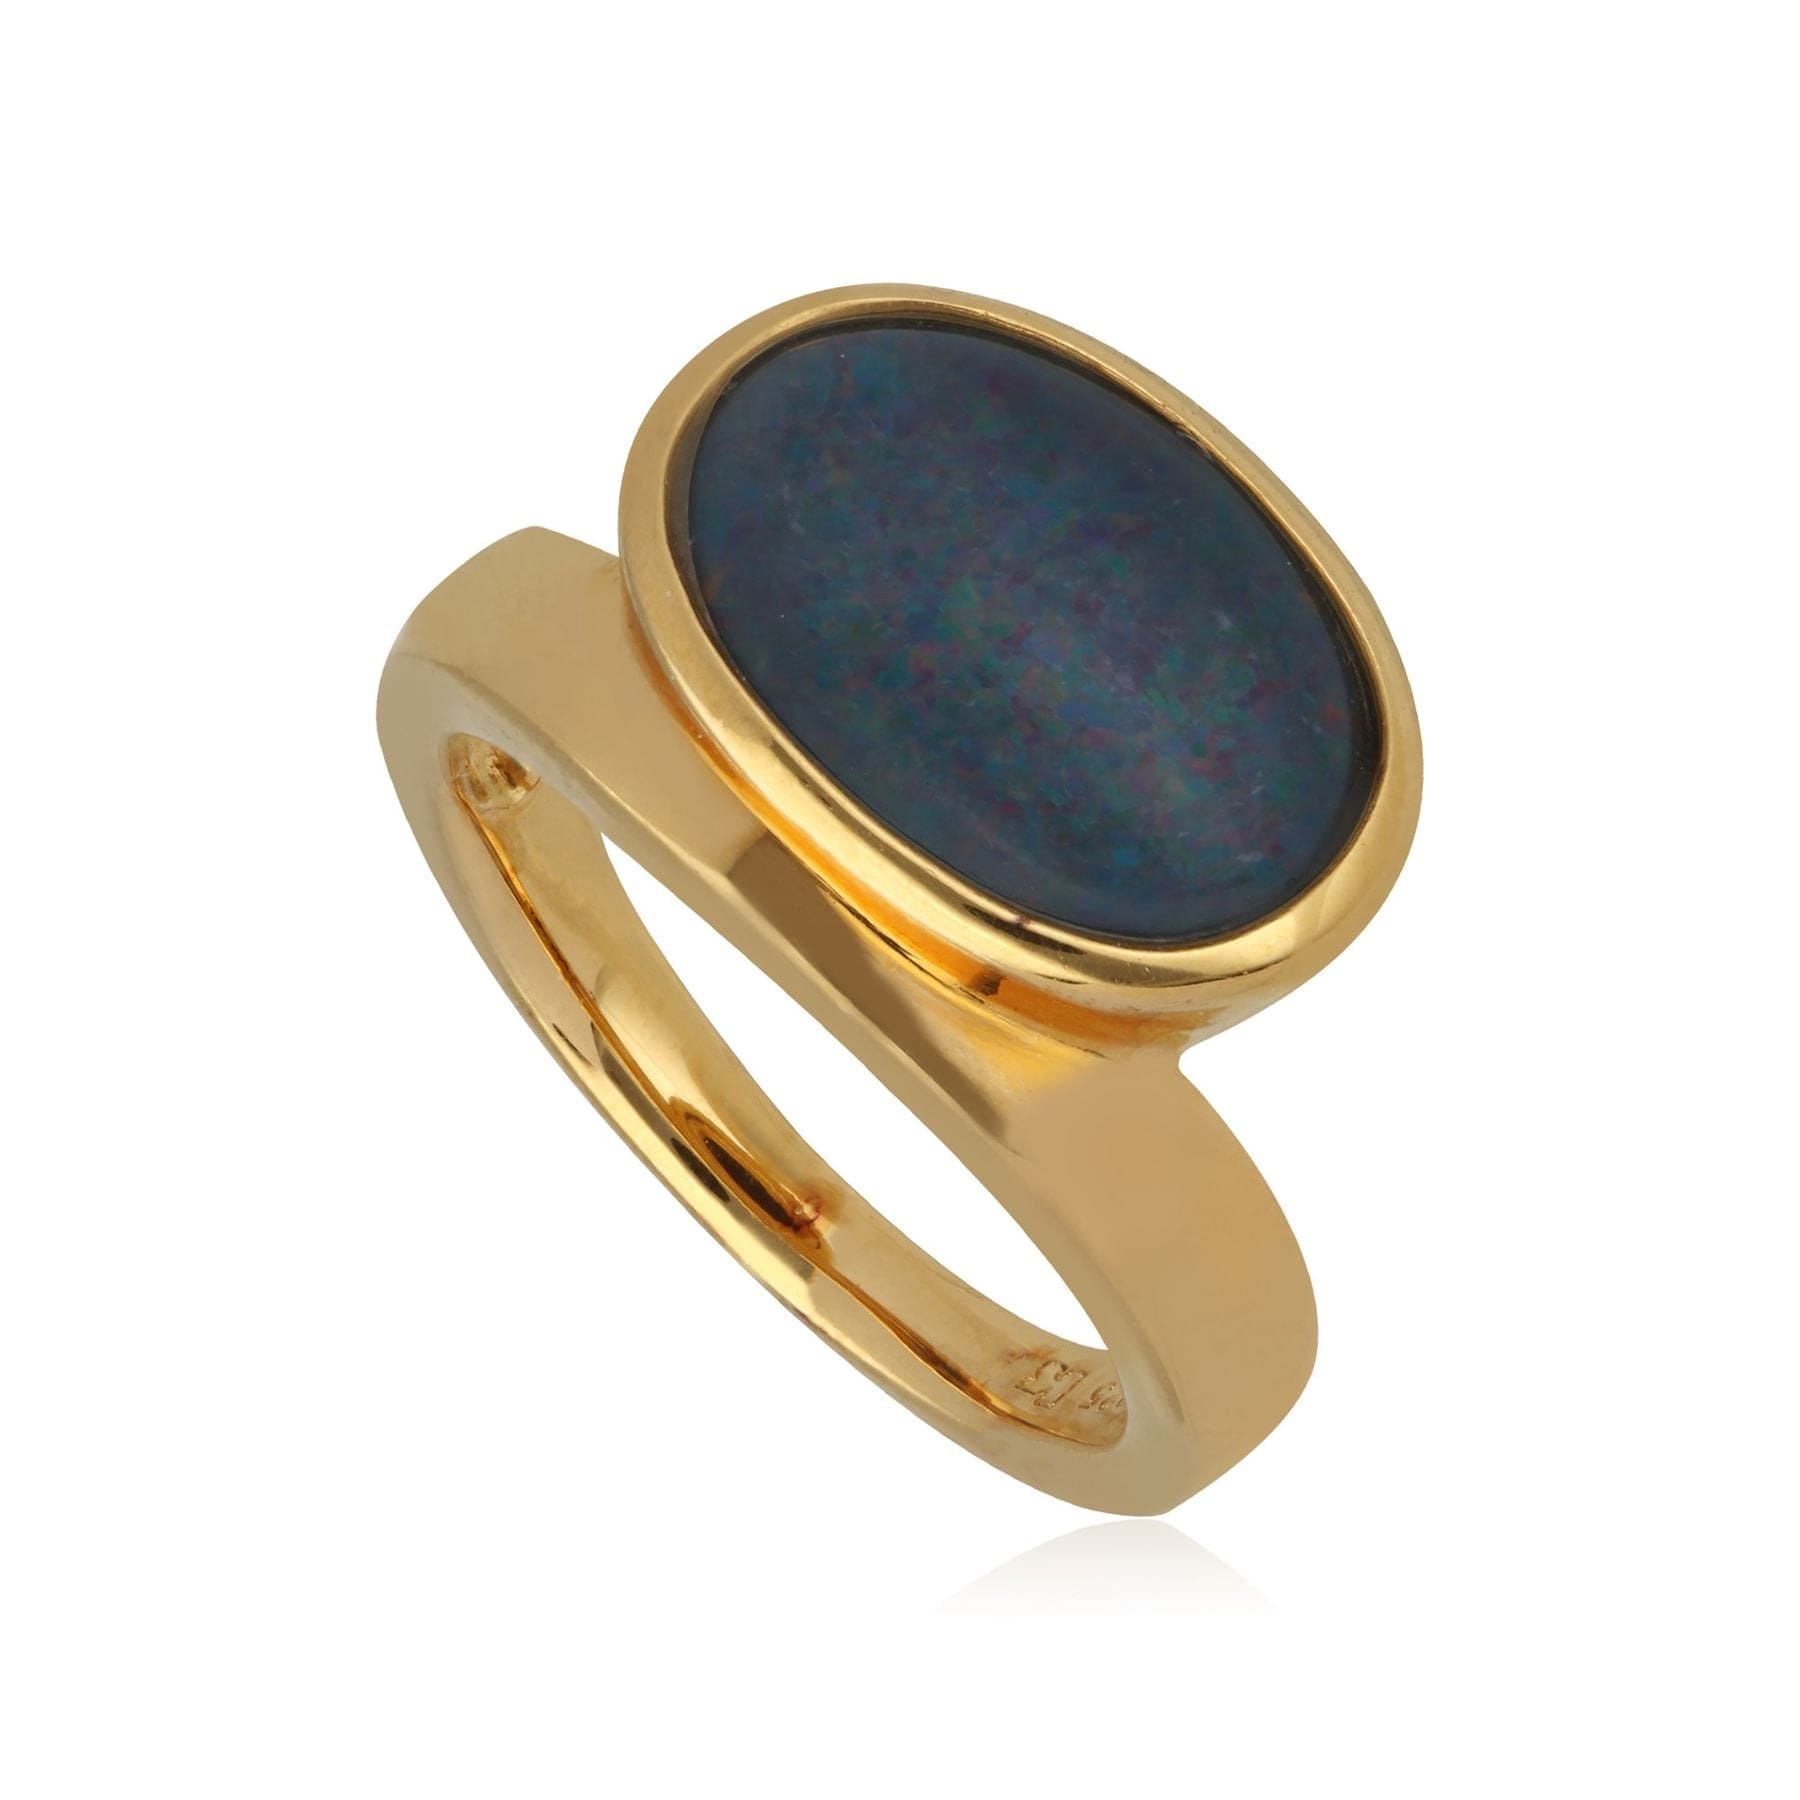 Kosmos Triplet Opal Cocktail Ring in Yellow Gold Plated Sterling Silver - Gemondo